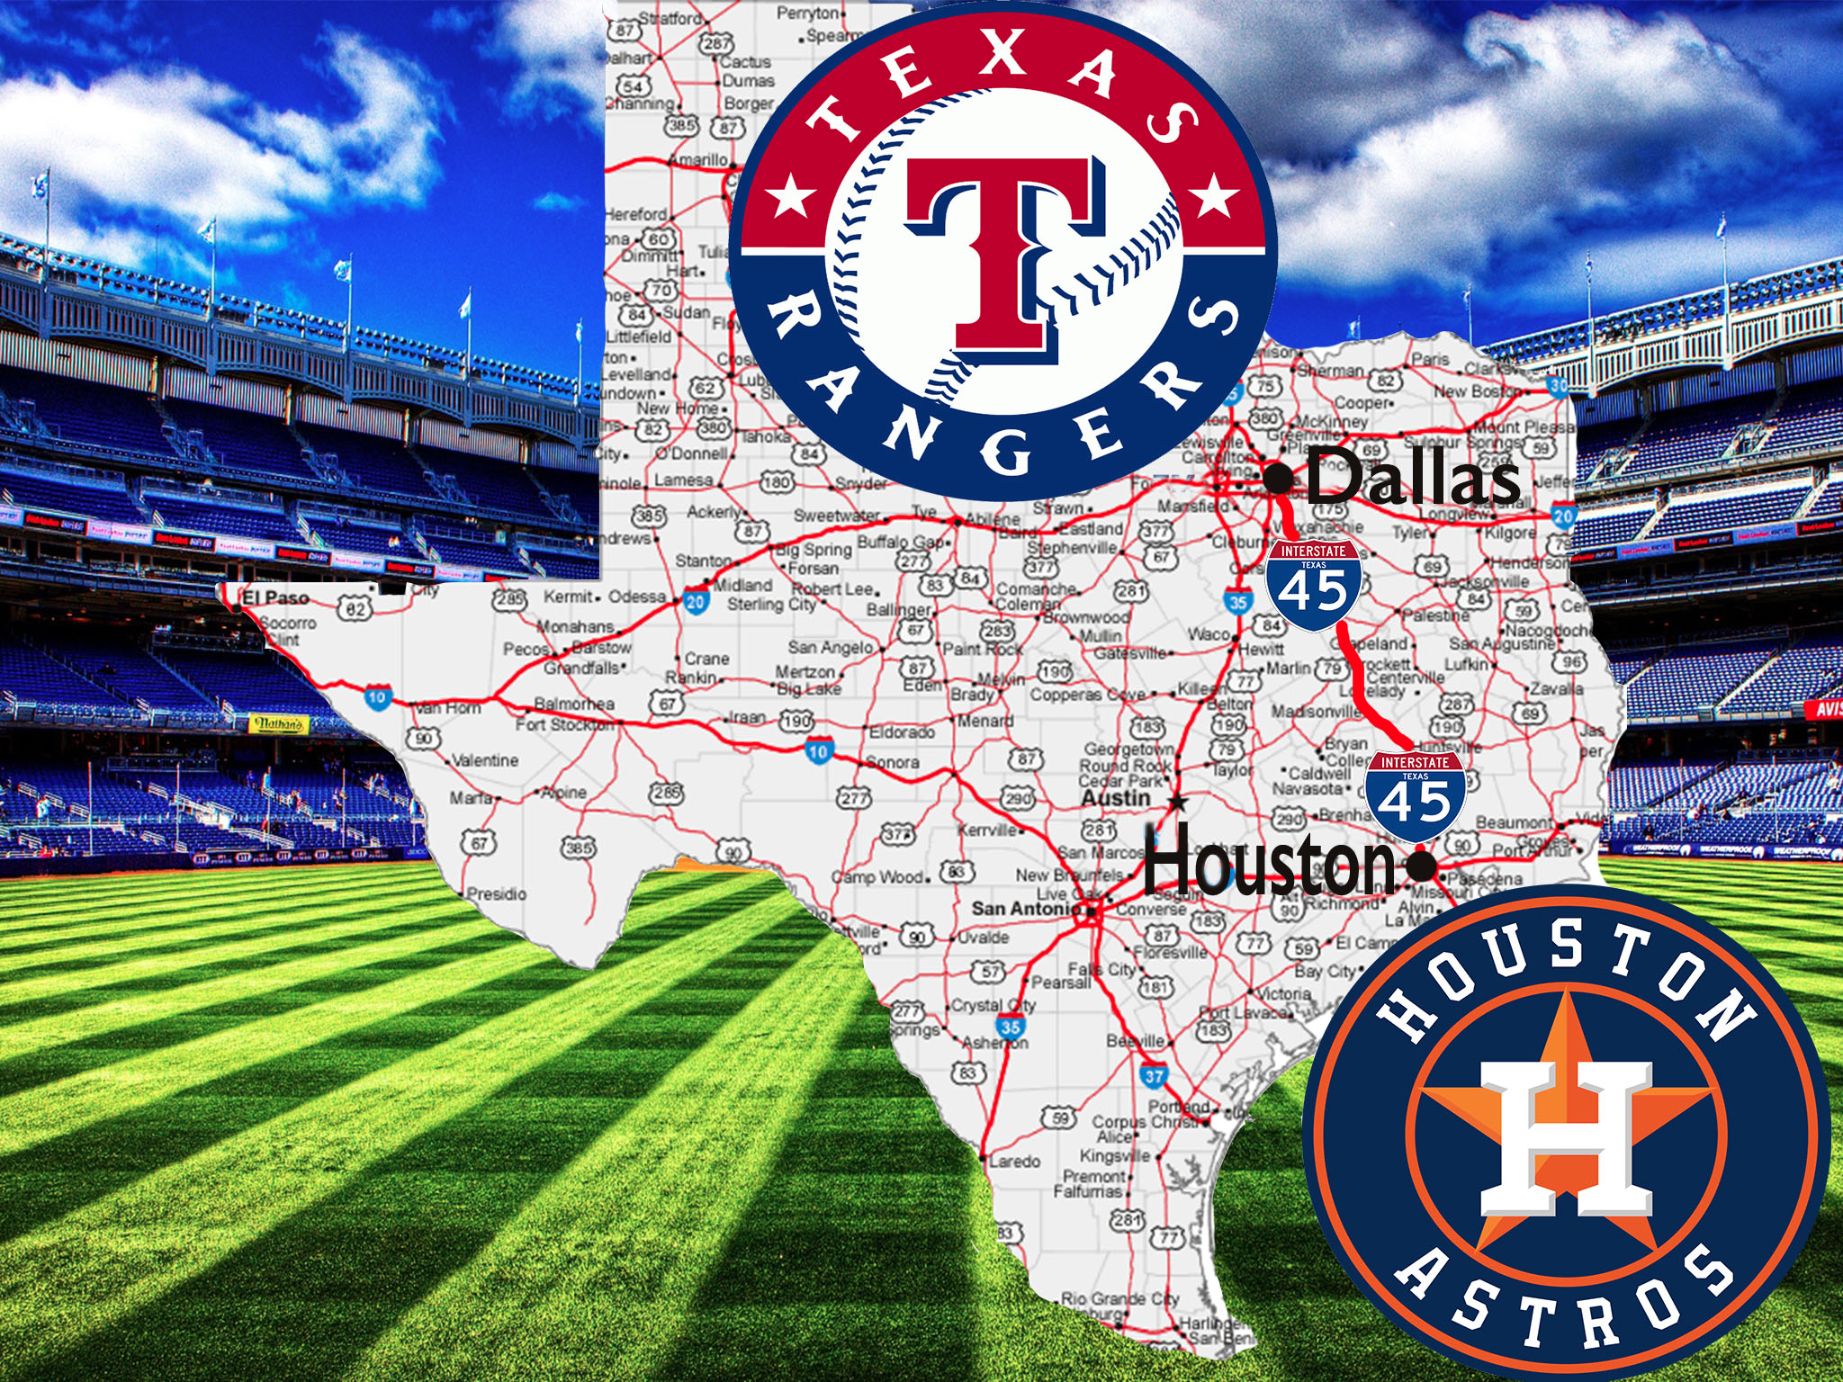 How the Astros-Rangers rivalry got so intense over the years